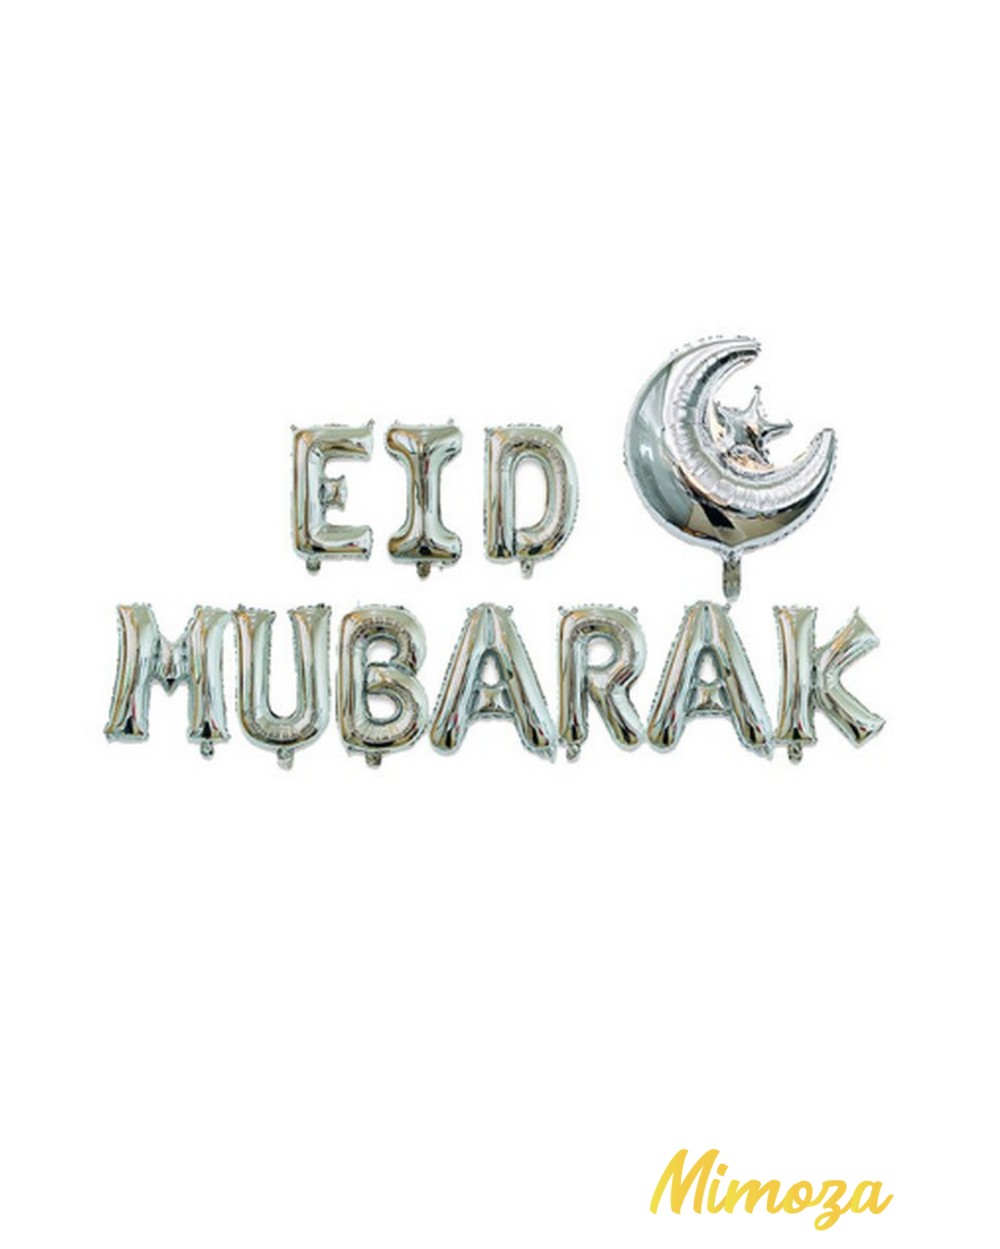 Eid Mubarak decoration with inflatable star and crescent moon